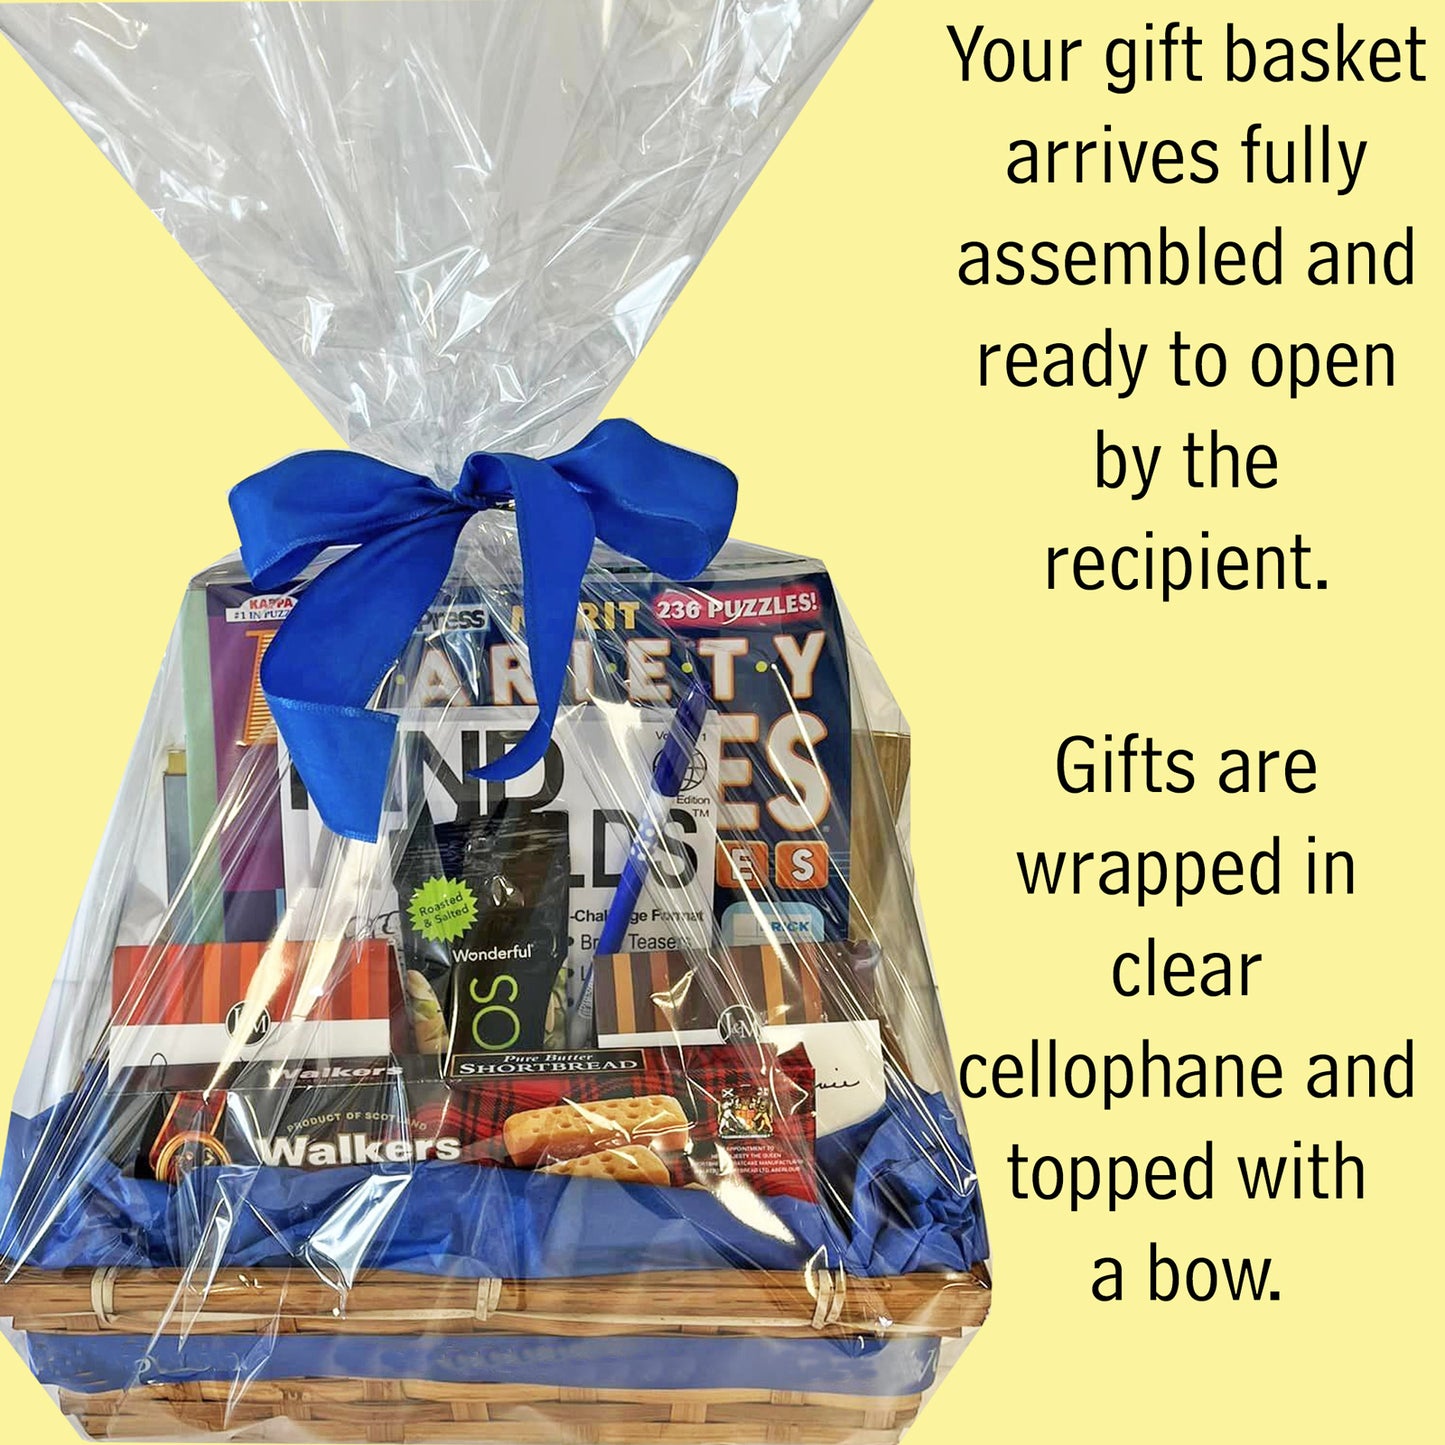 Entertainer Fun Gift Basket with Puzzle Books and Snacks for His or Her Birthday, Thinking of You, Retirement, Congratulations